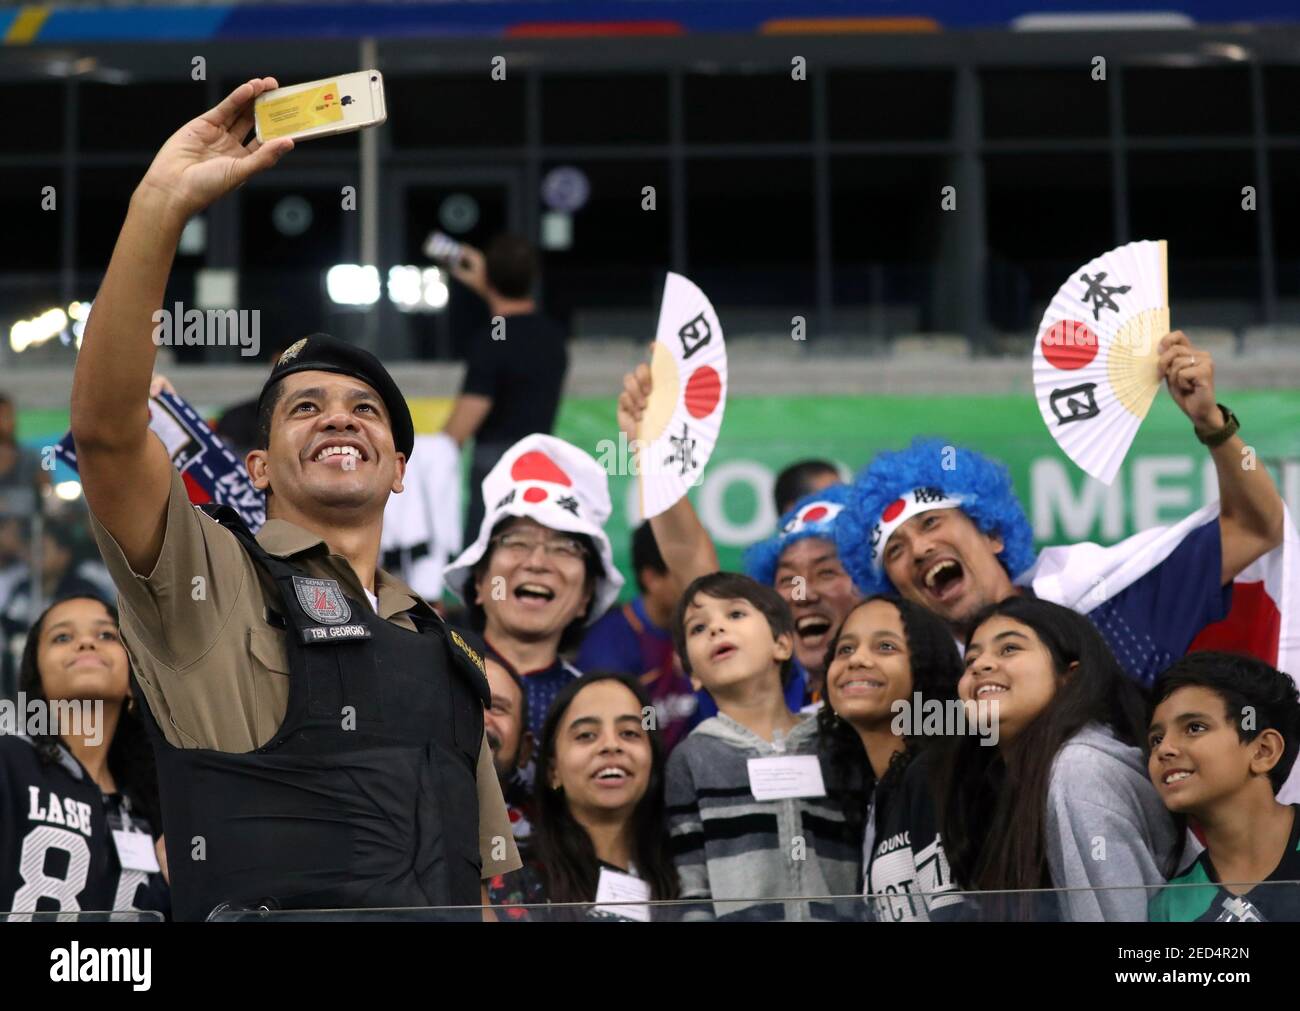 Soccer Football - Copa America Brazil 2019 - Group C - Ecuador v Japan - Mineirao Stadium, Belo Horizonte, Brazil - June 24, 2019   General view of a police office taking a selfie with Japan fans before the match   REUTERS/Edgard Garrido Stock Photo